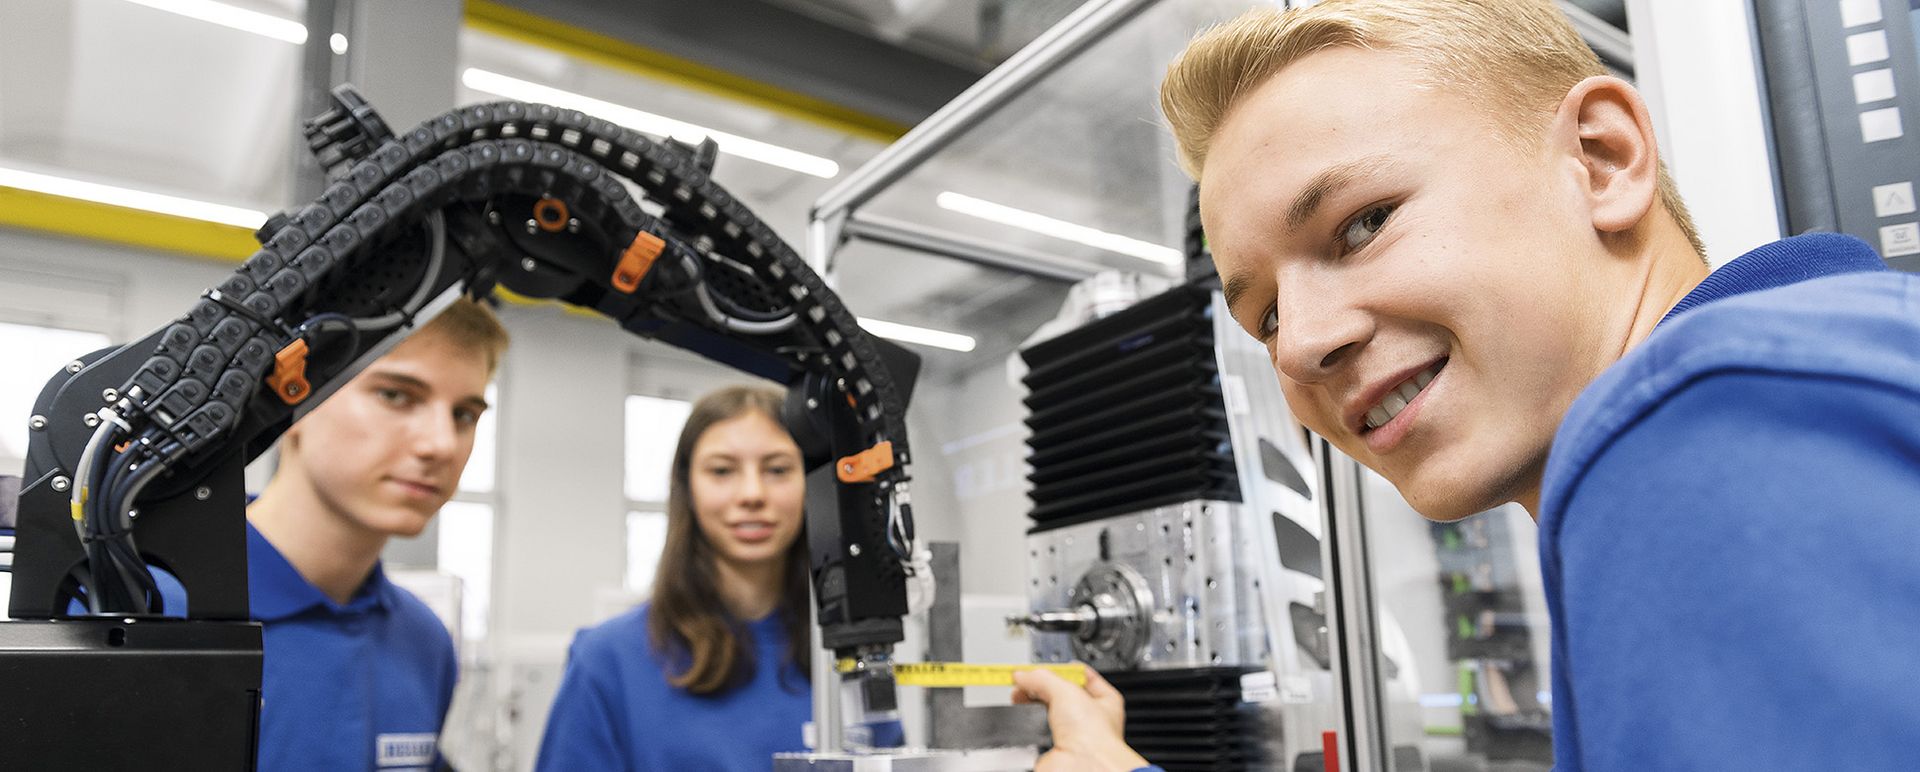 Training at HELLER: Electronics Engineer for Automation Engineering